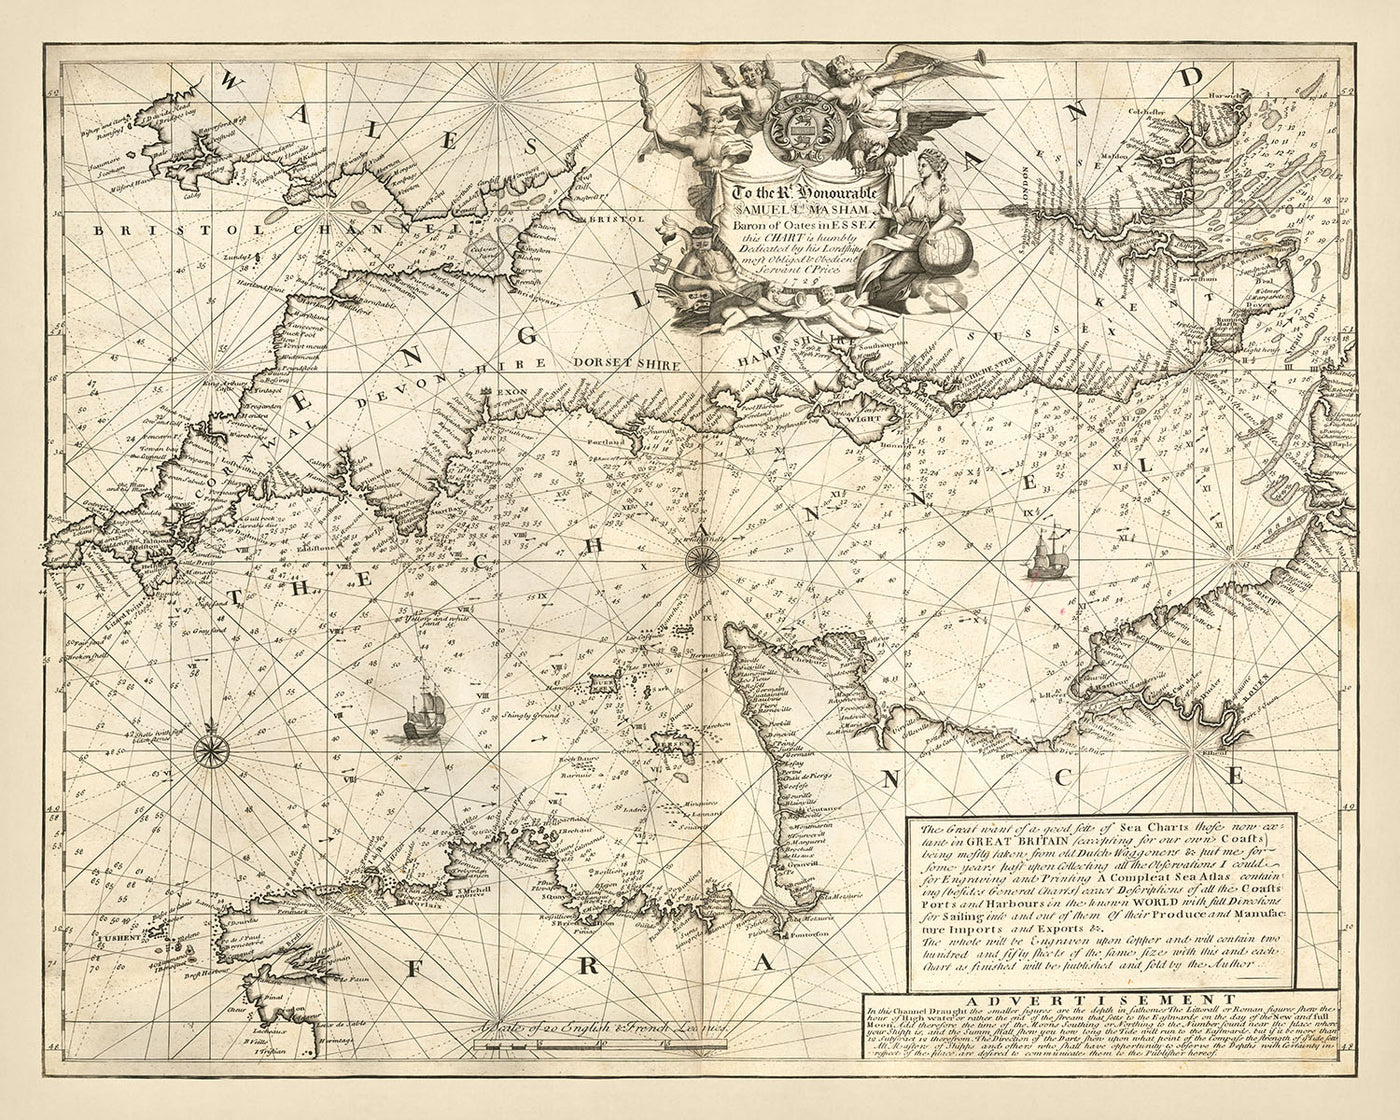 Old Naval Chart of the English Channel by Price, 1729: La Manche, London, Bristol, Cherbourg, Saint-Malo